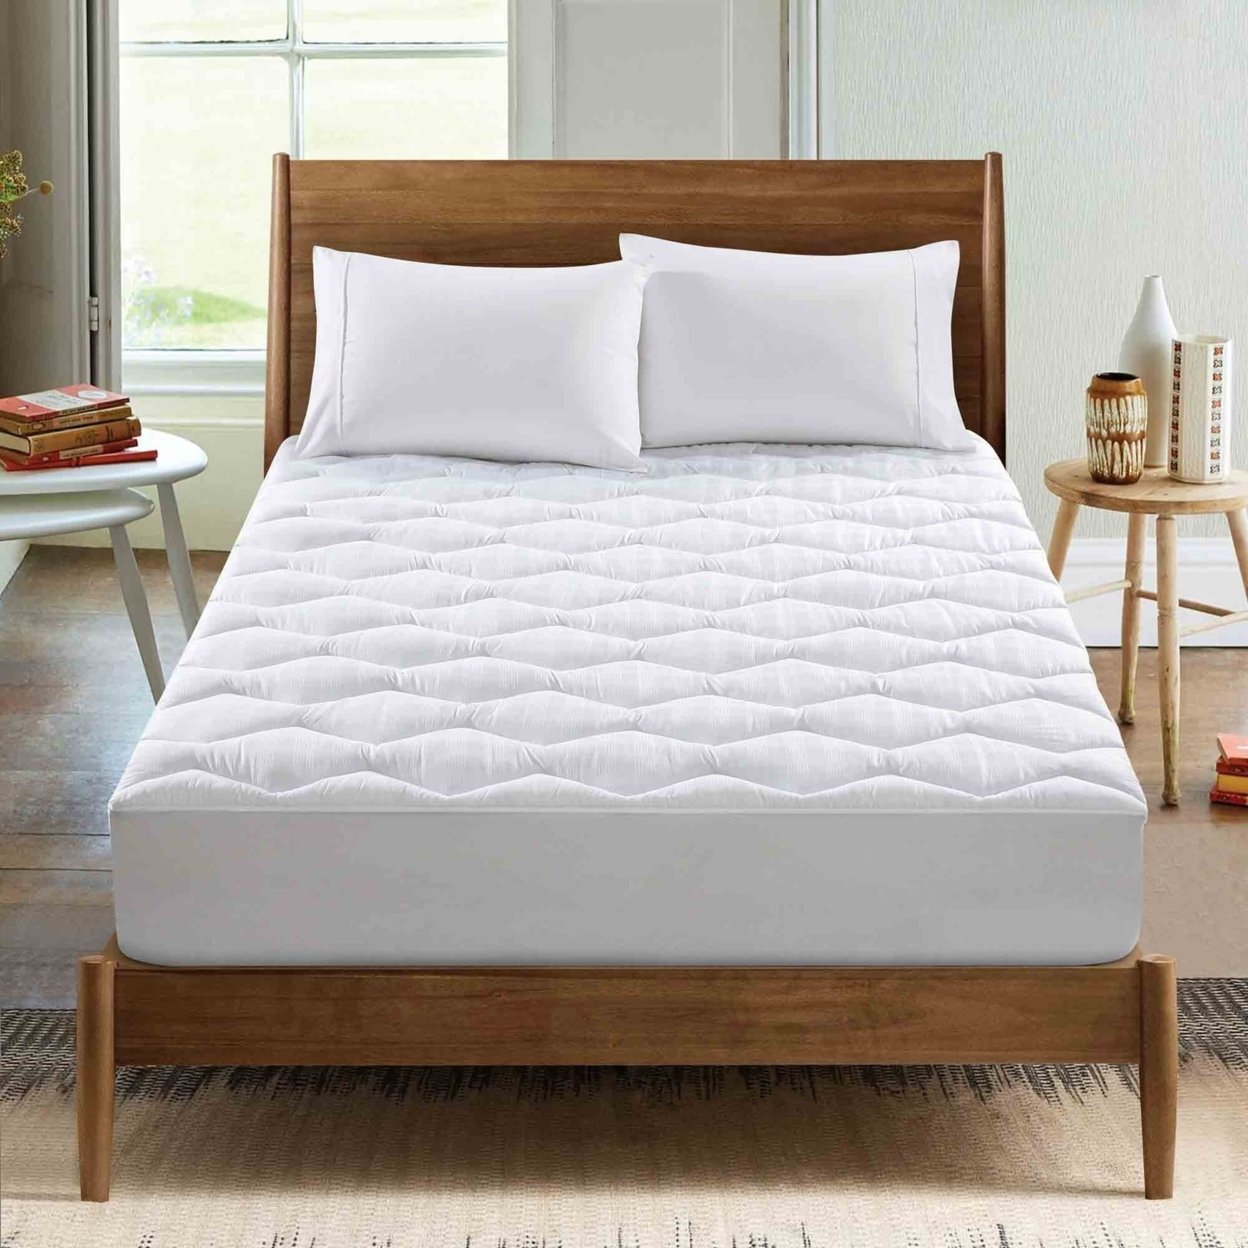 Down Alternative Mattress Pad With 500 Thread Count Cotton Cover, 18 Inch Deep, Soft And Breathable Bedding - King, White